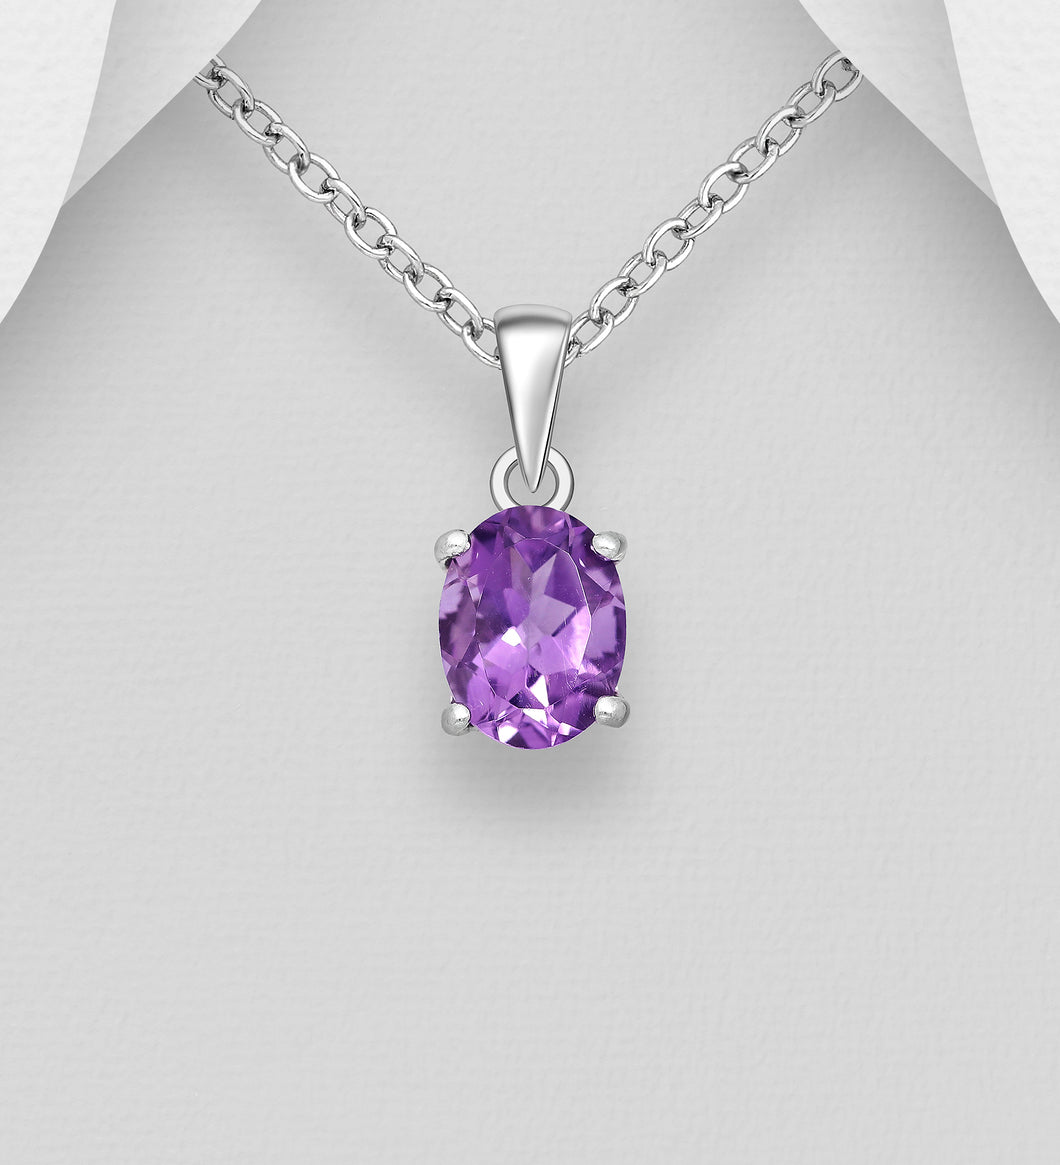 Silver Pendant, Decorated with Natural Amethyst Gemstones